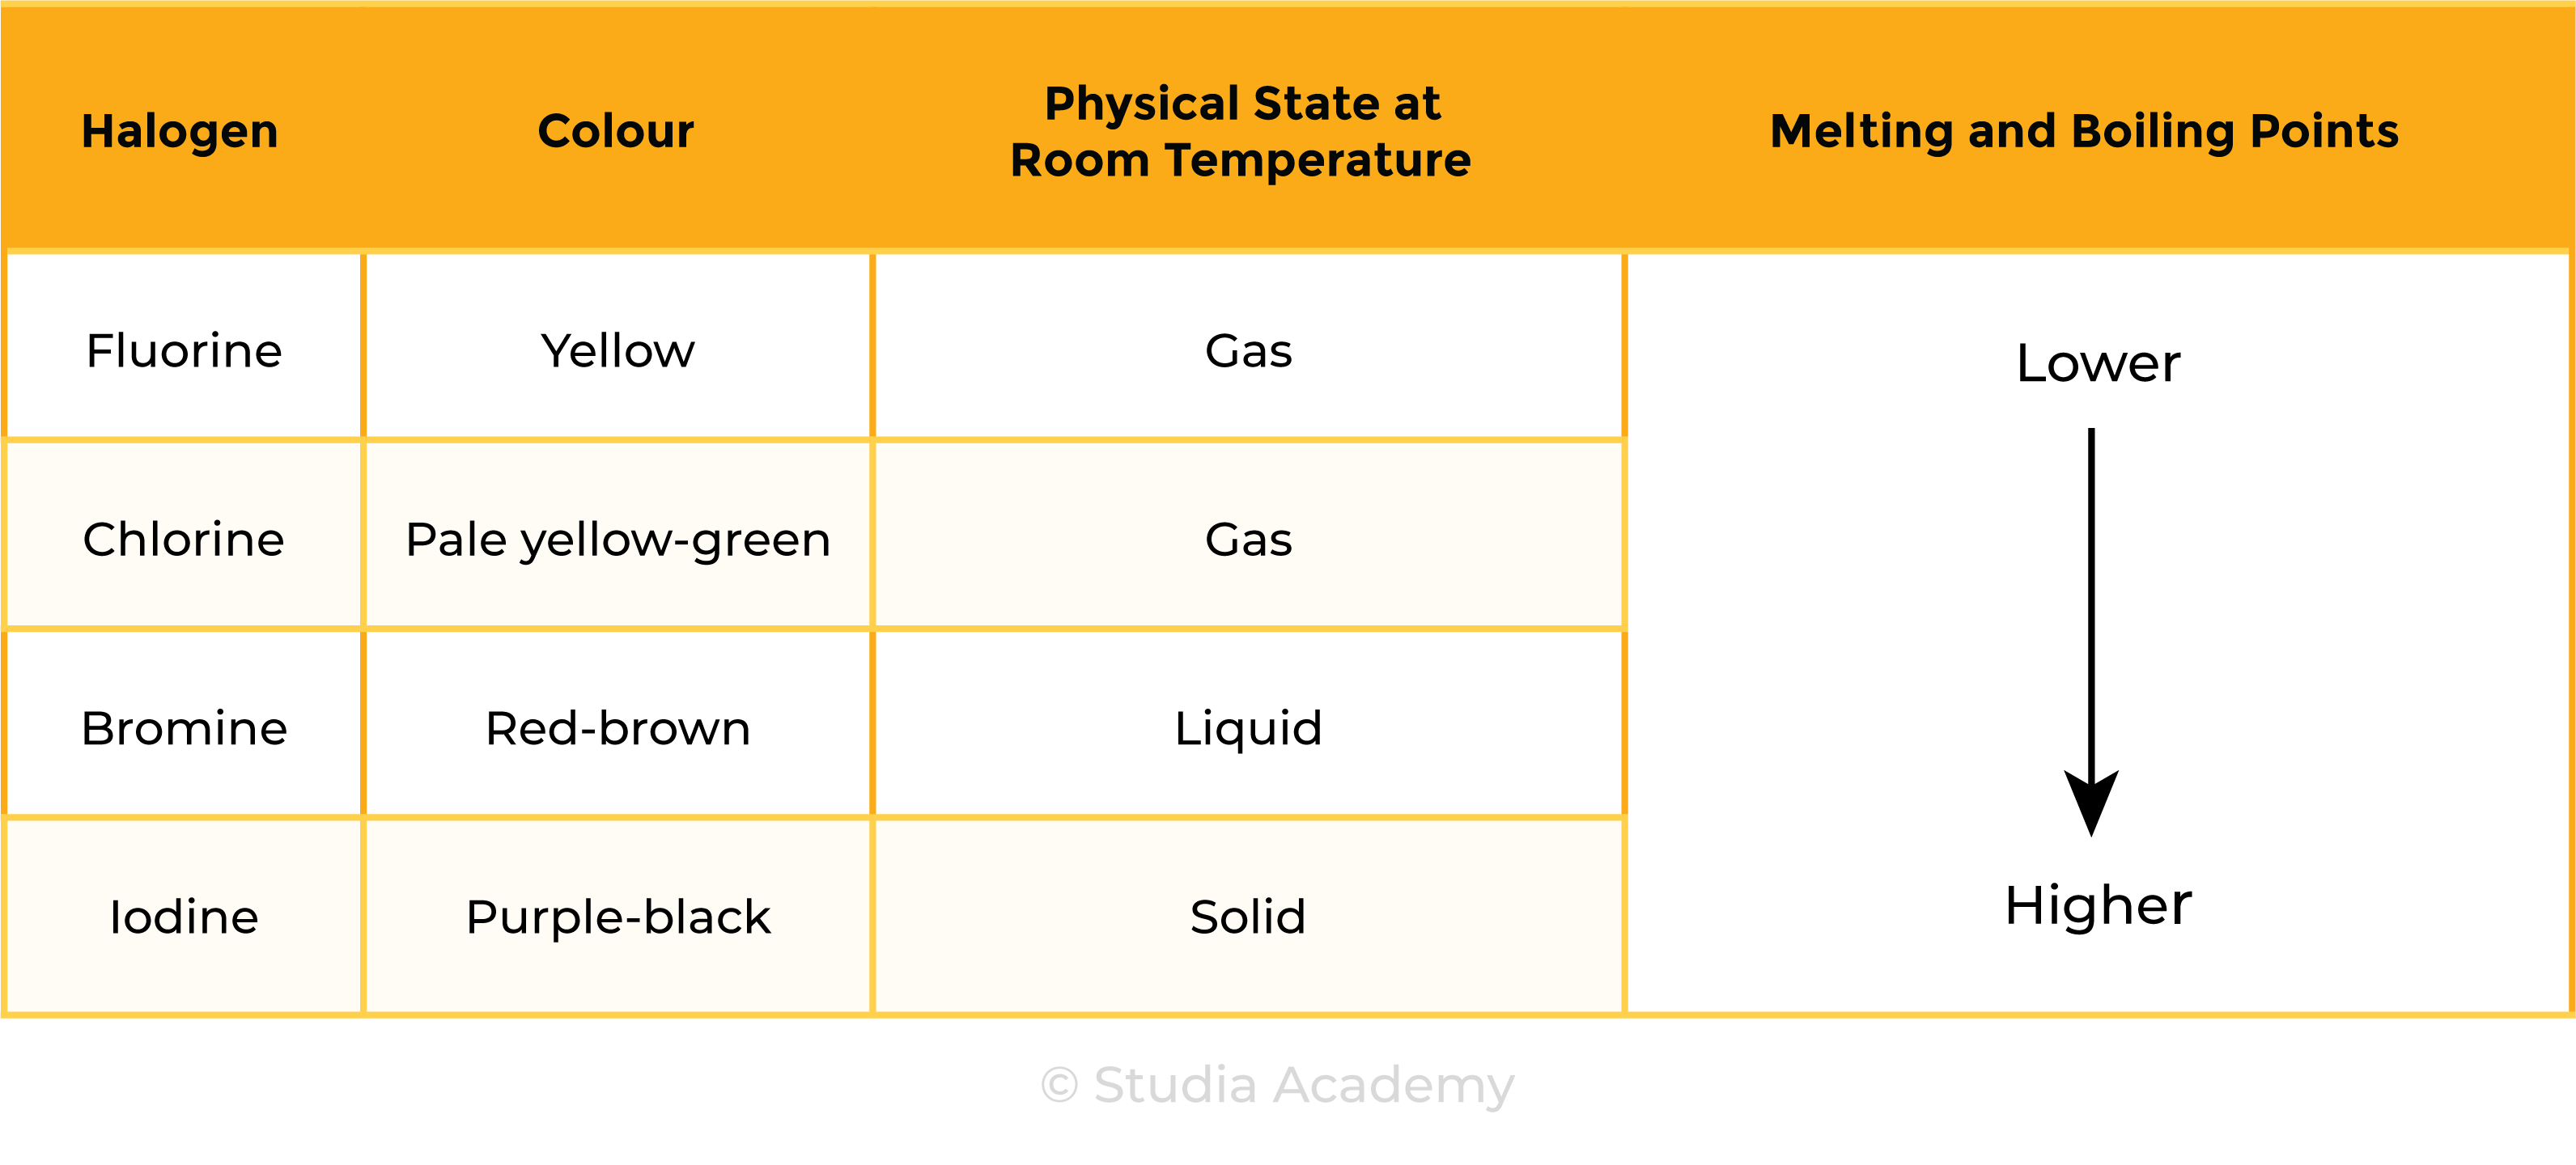 edexcel_igcse_chemistry_topic 11 tables_group 7 (halogens) chlorine, bromine, and iodine_001_halogens trends in physical properties